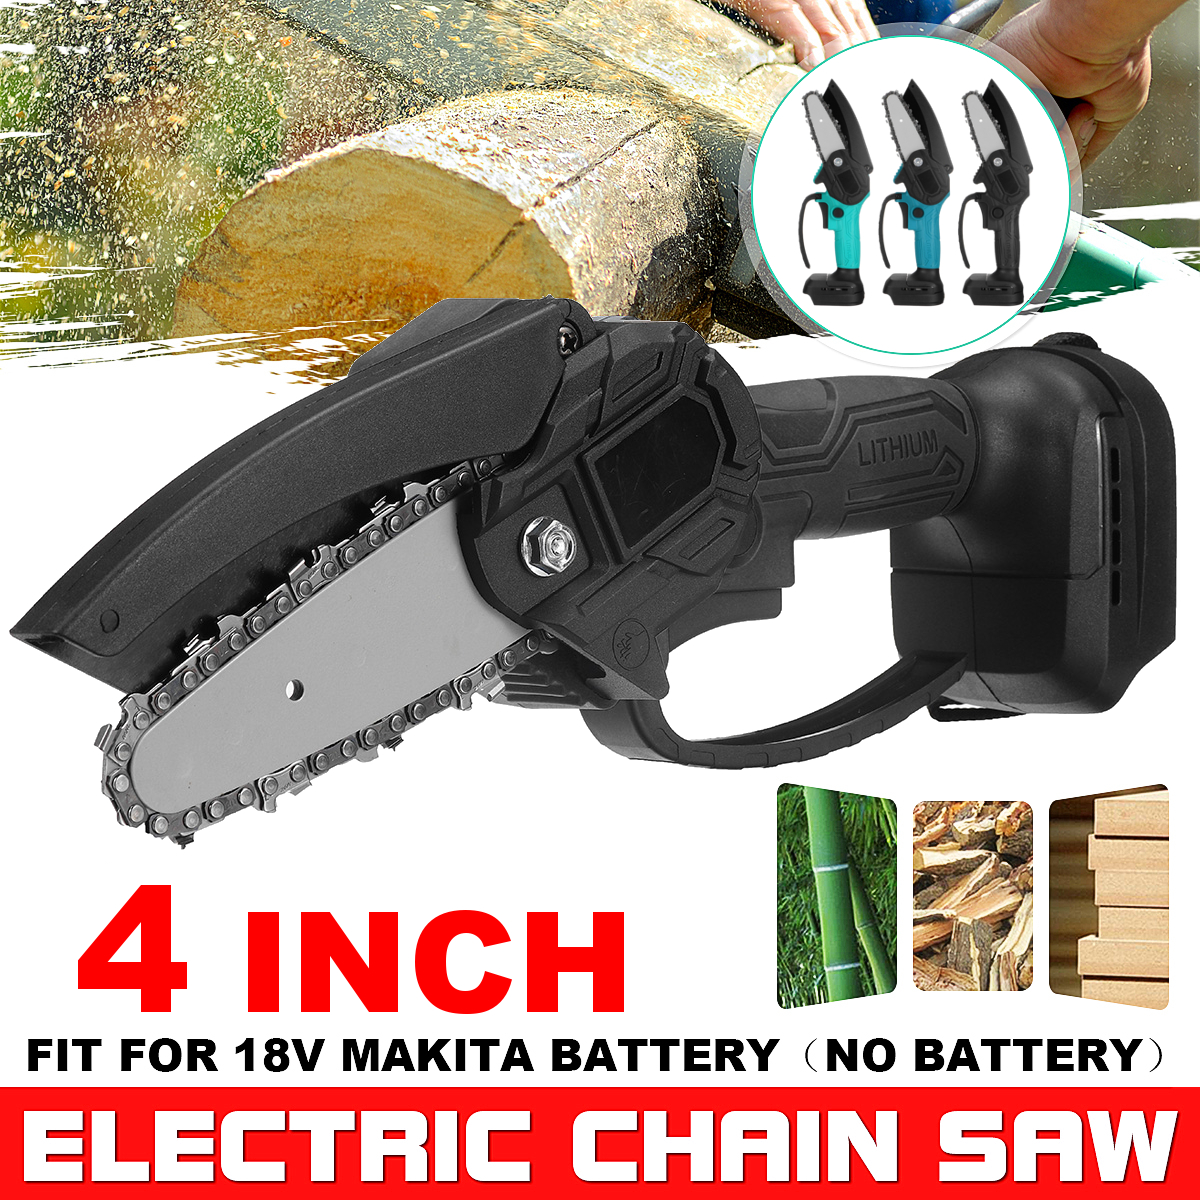 4-Inch-Electric-Chain-Saw-Cordless-Chainsaw-Multi-function-Woodworking-Wood-Cutter-For-Makita-18V-Ba-1861026-1